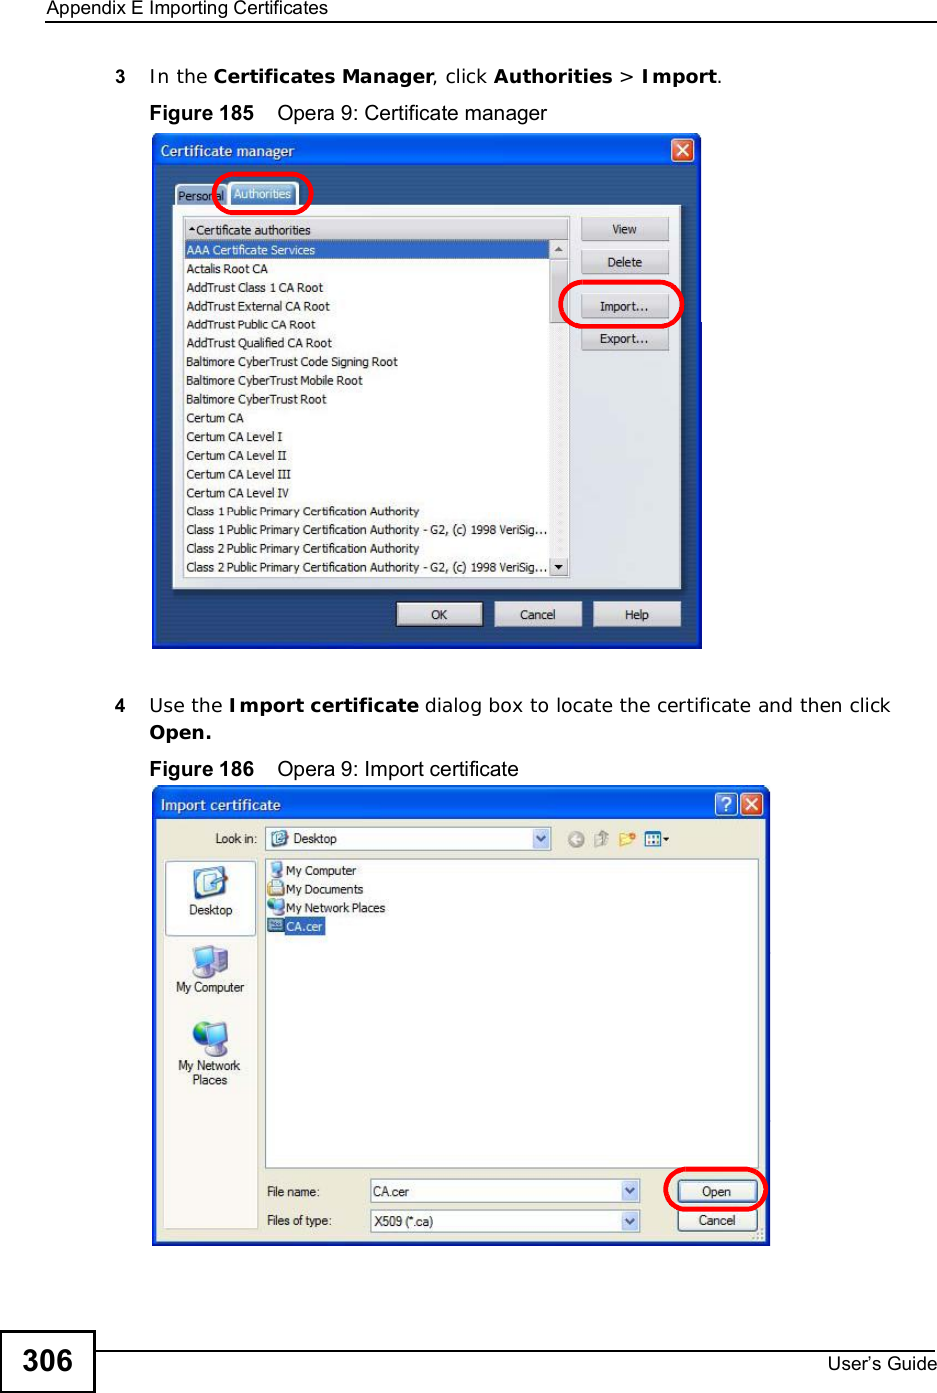 Appendix EImporting CertificatesUser s Guide3063In the Certificates Manager, click Authorities &gt; Import.Figure 185    Opera 9: Certificate manager4Use the Import certificate dialog box to locate the certificate and then clickOpen.Figure 186    Opera 9: Import certificate